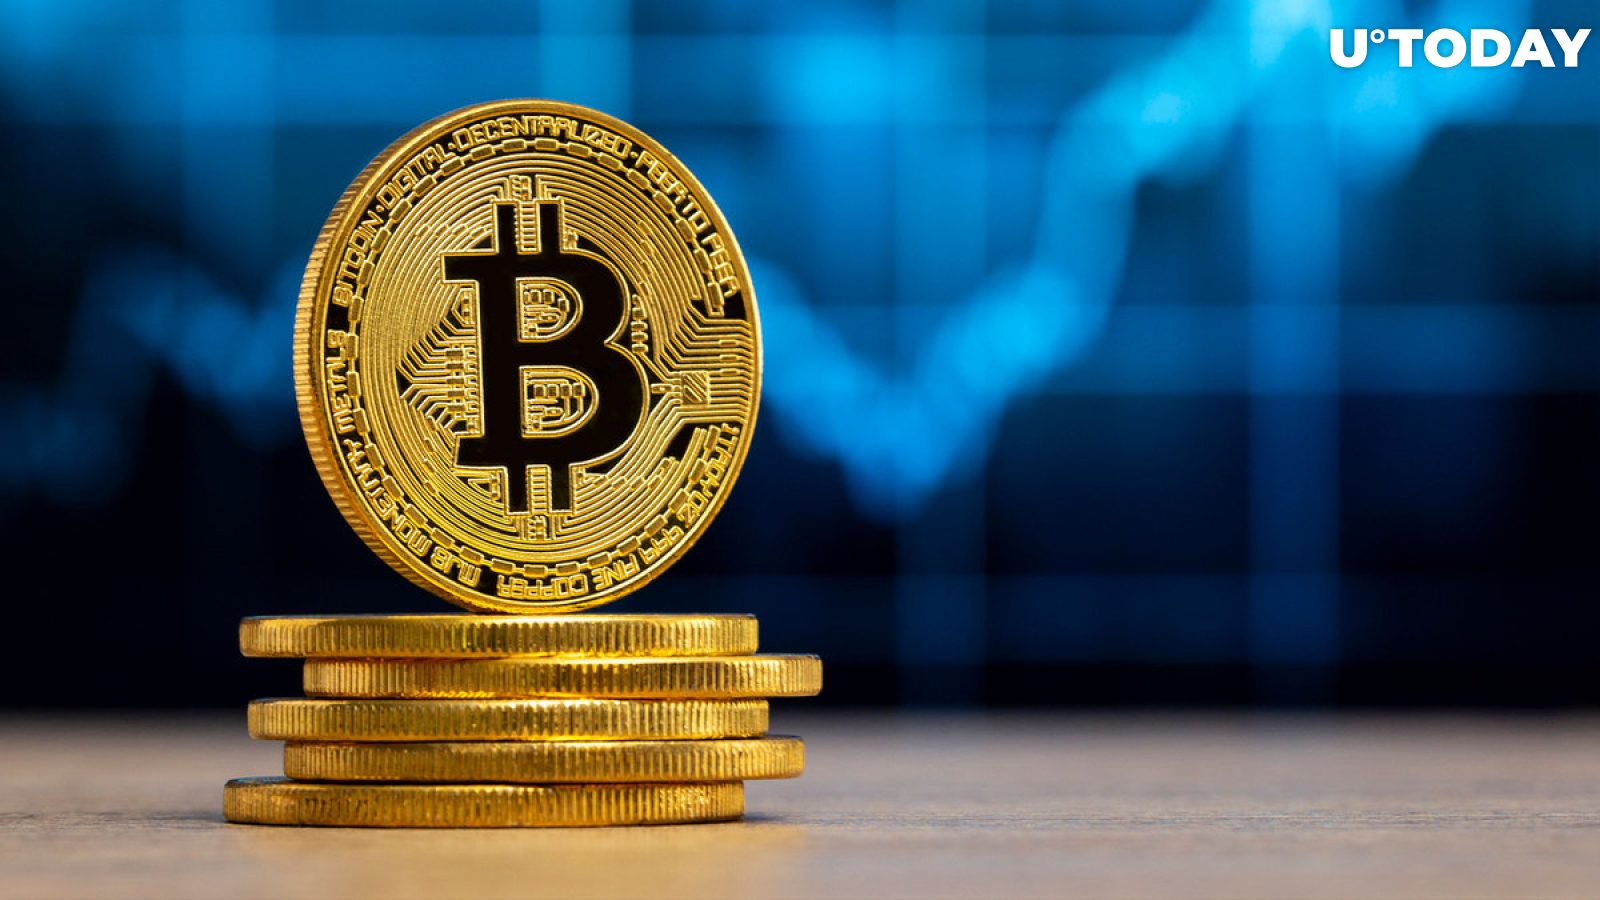 Bitcoin Price Has Odds to Hit $47,360 If This Scenario Plays Out: Analyst